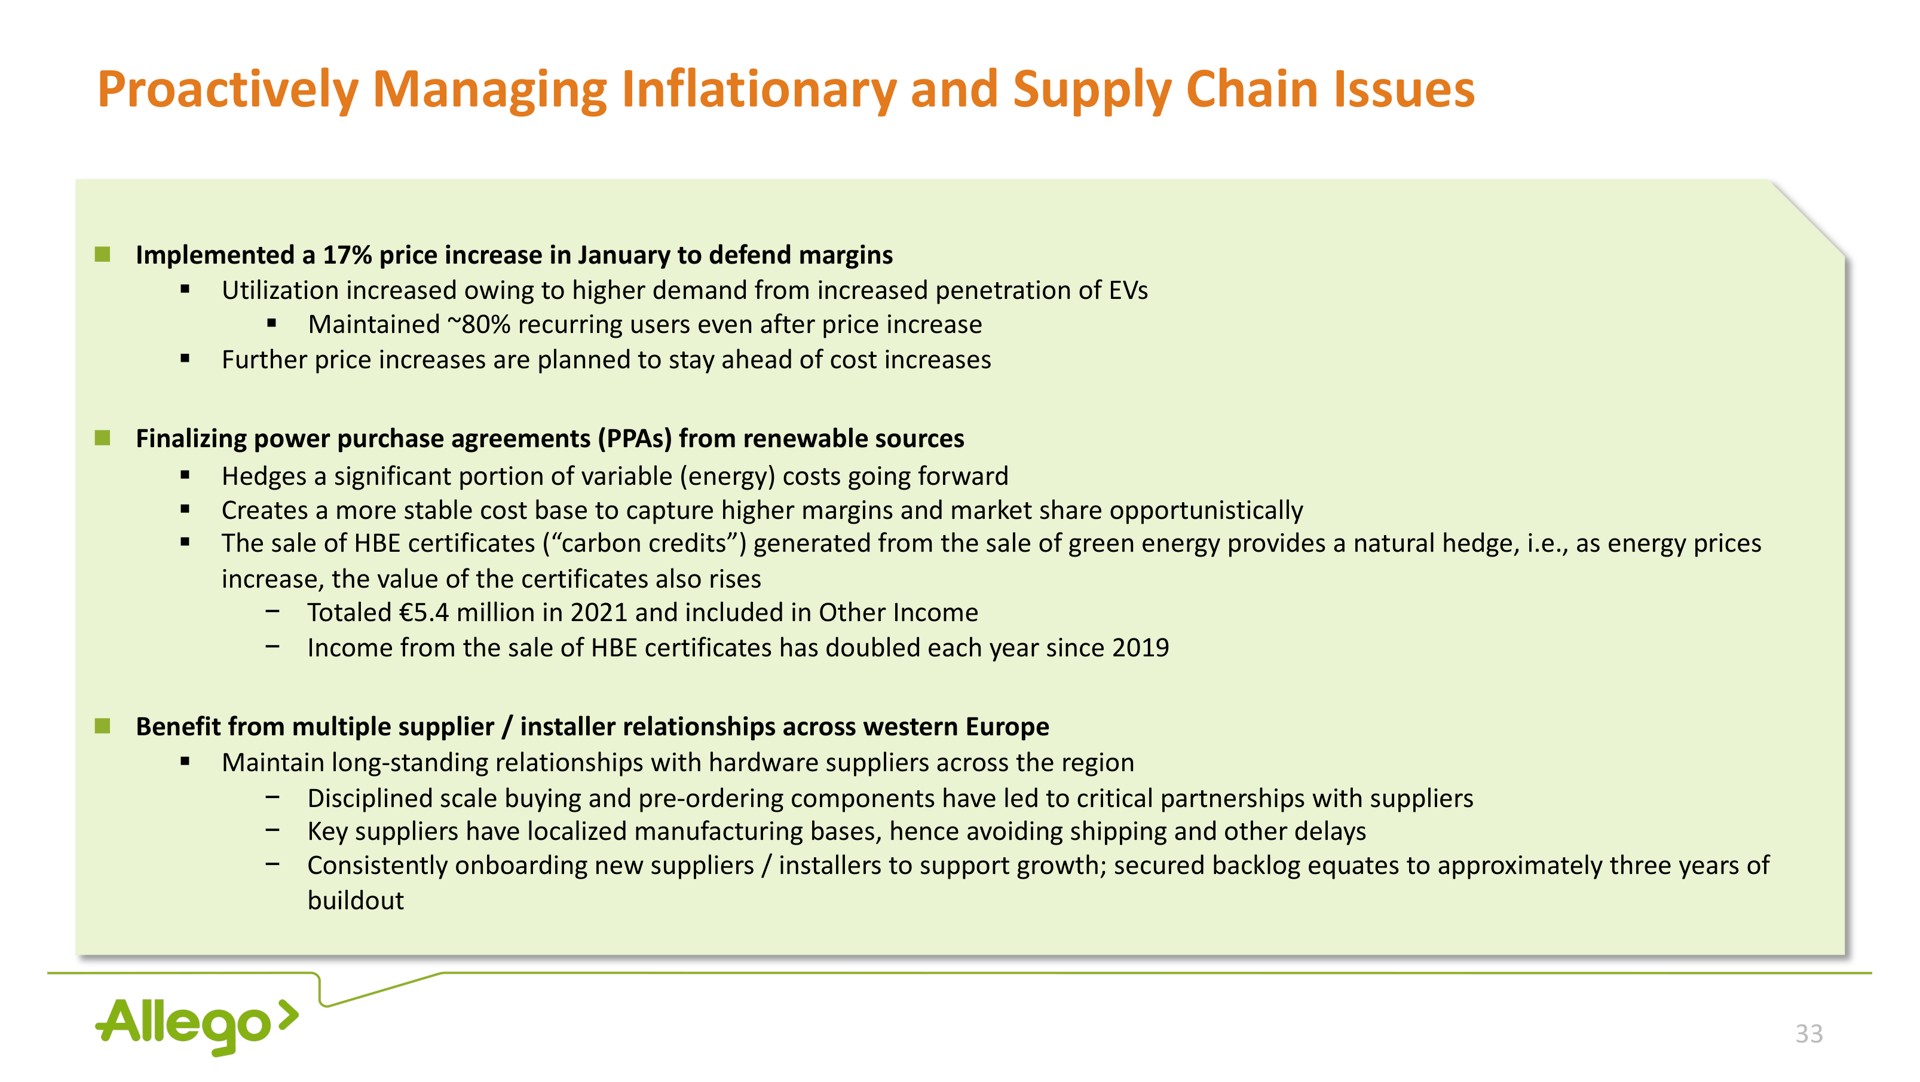 managing inflationary and supply chain issues | Allego